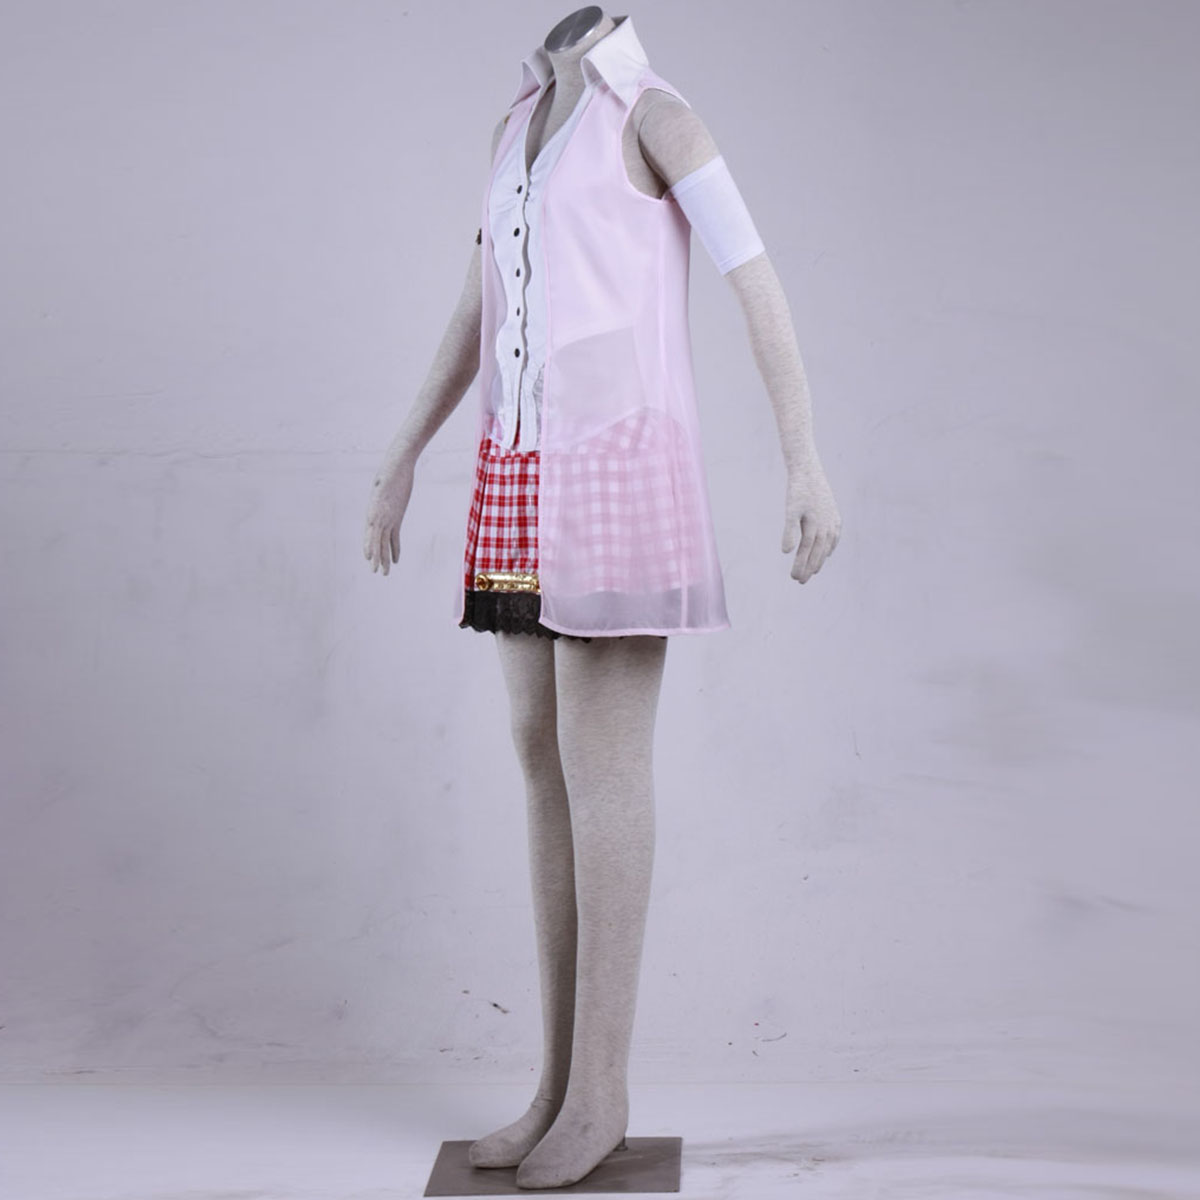 Final Fantasy XIII Serah Farron 1 Anime Cosplay Costumes Outfit